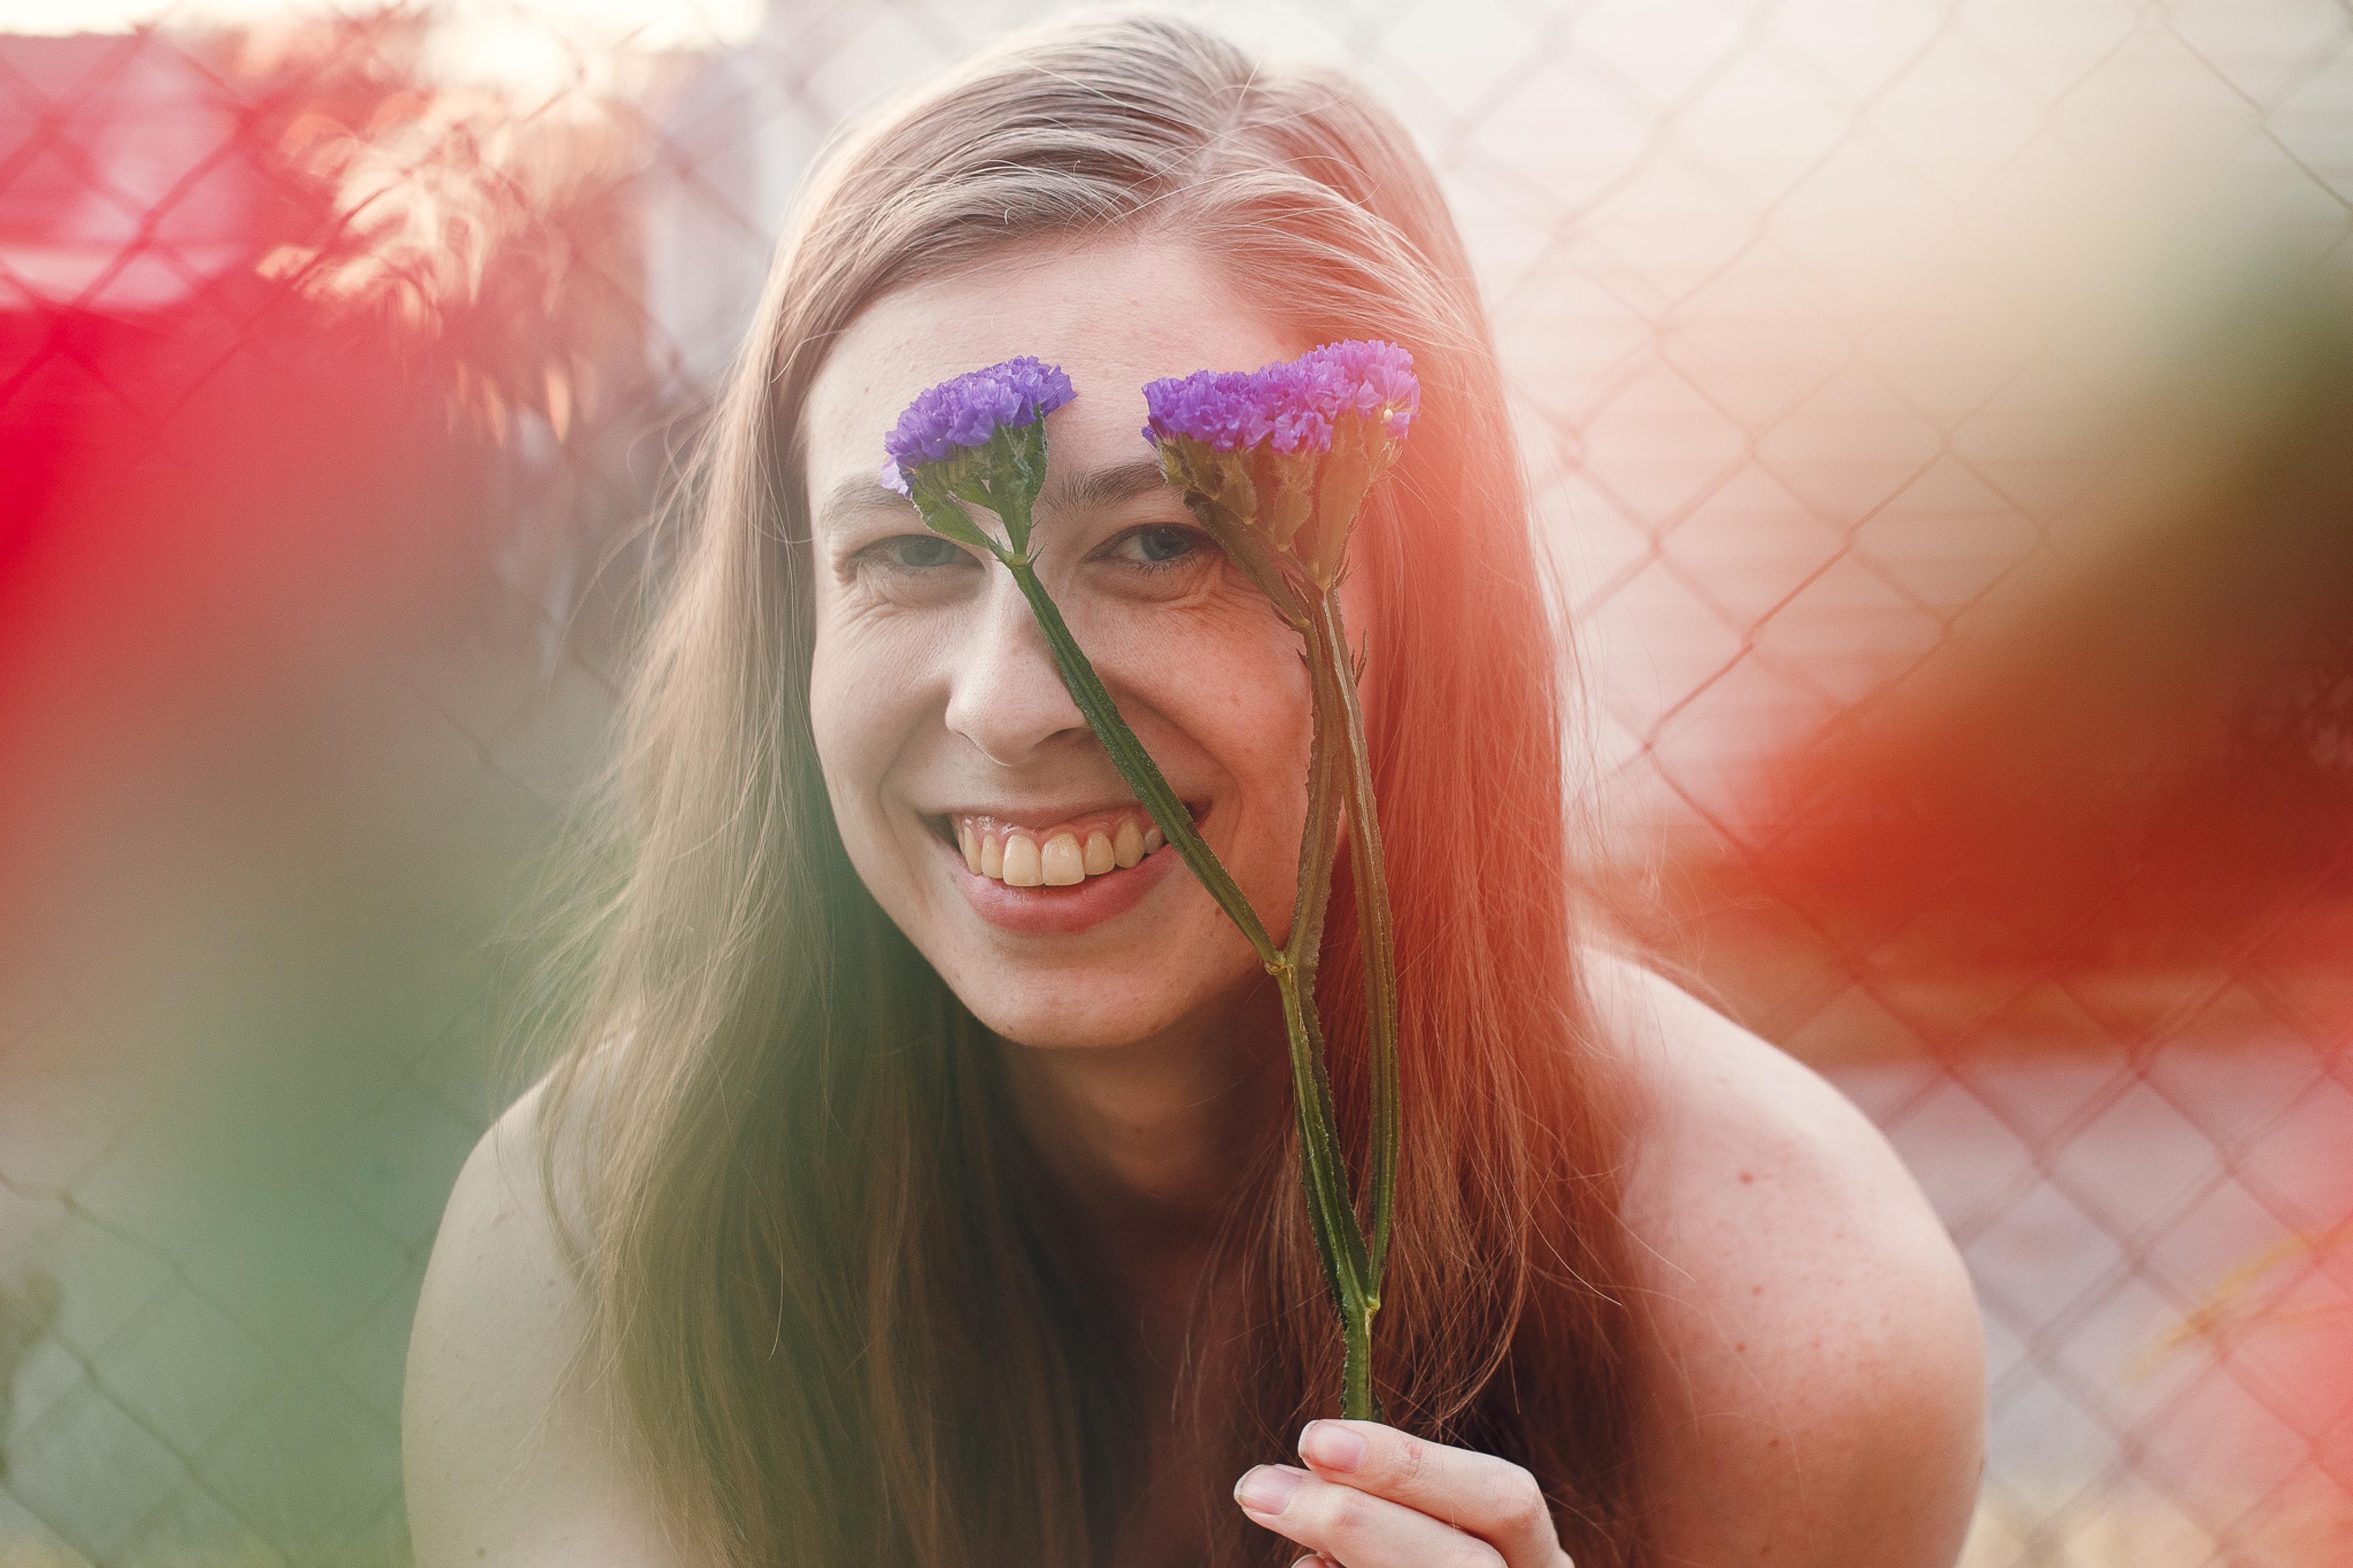 A smiling woman holds a flower up to her face